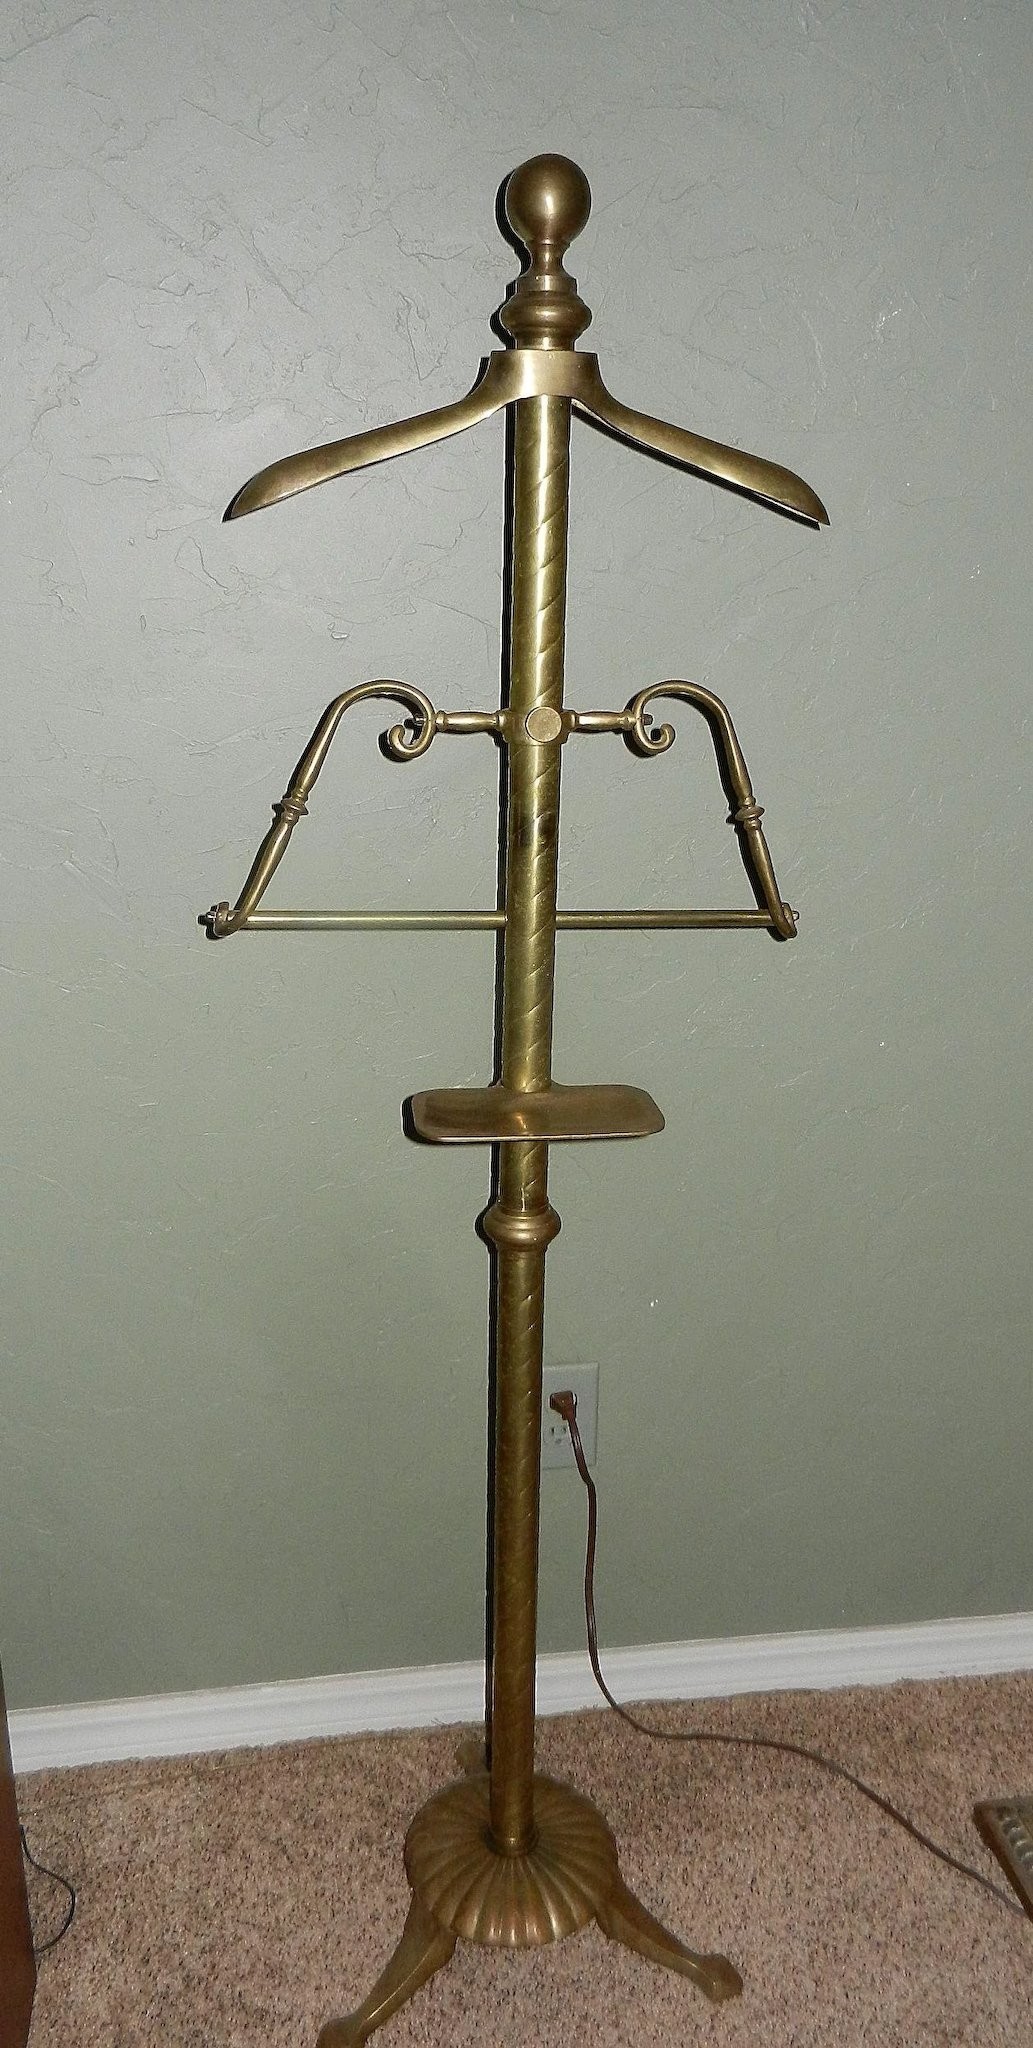 Vintage brass valet stand my grandmother had one ruby lane